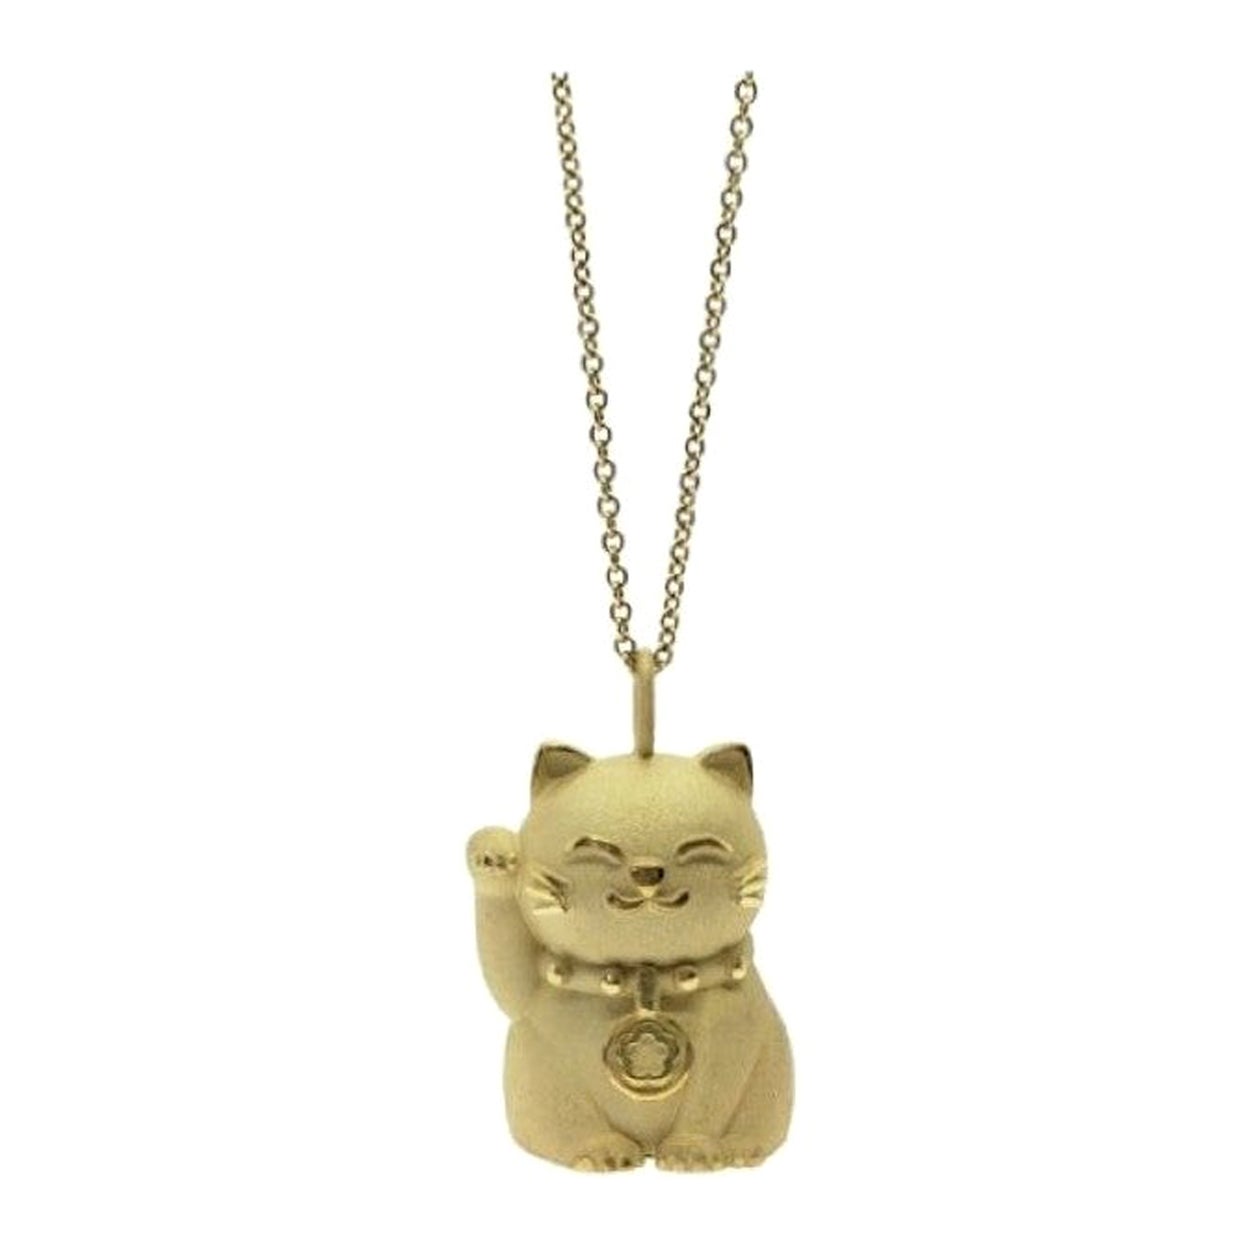 Mini Silver Hope Cat Necklace with 18K Gold Plating and Cherry Blossom pattern